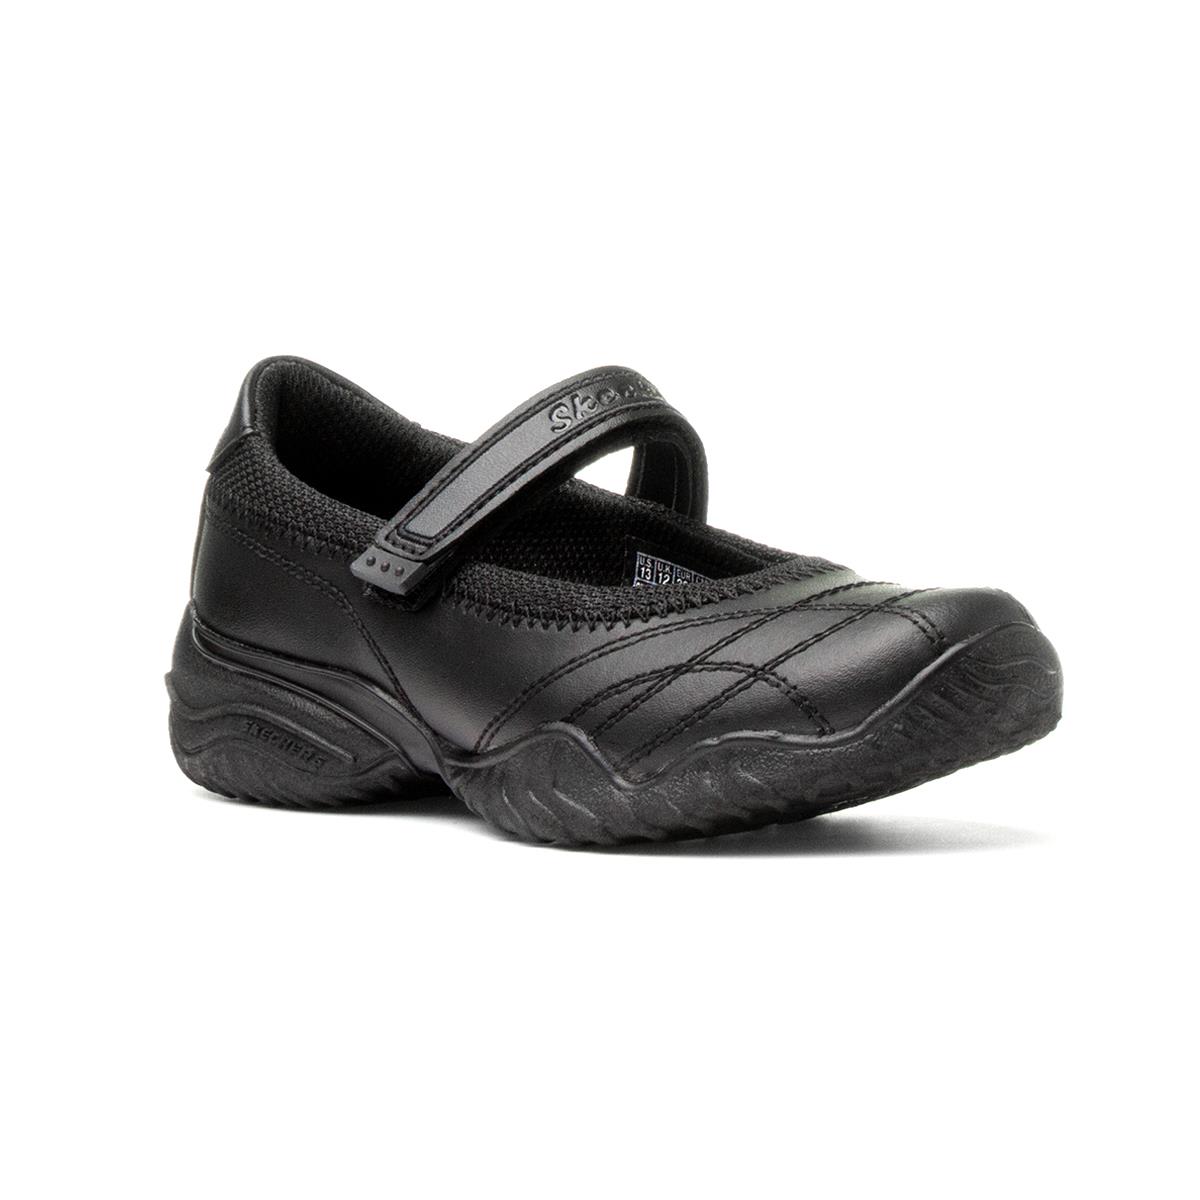 skechers ladies leather shoes